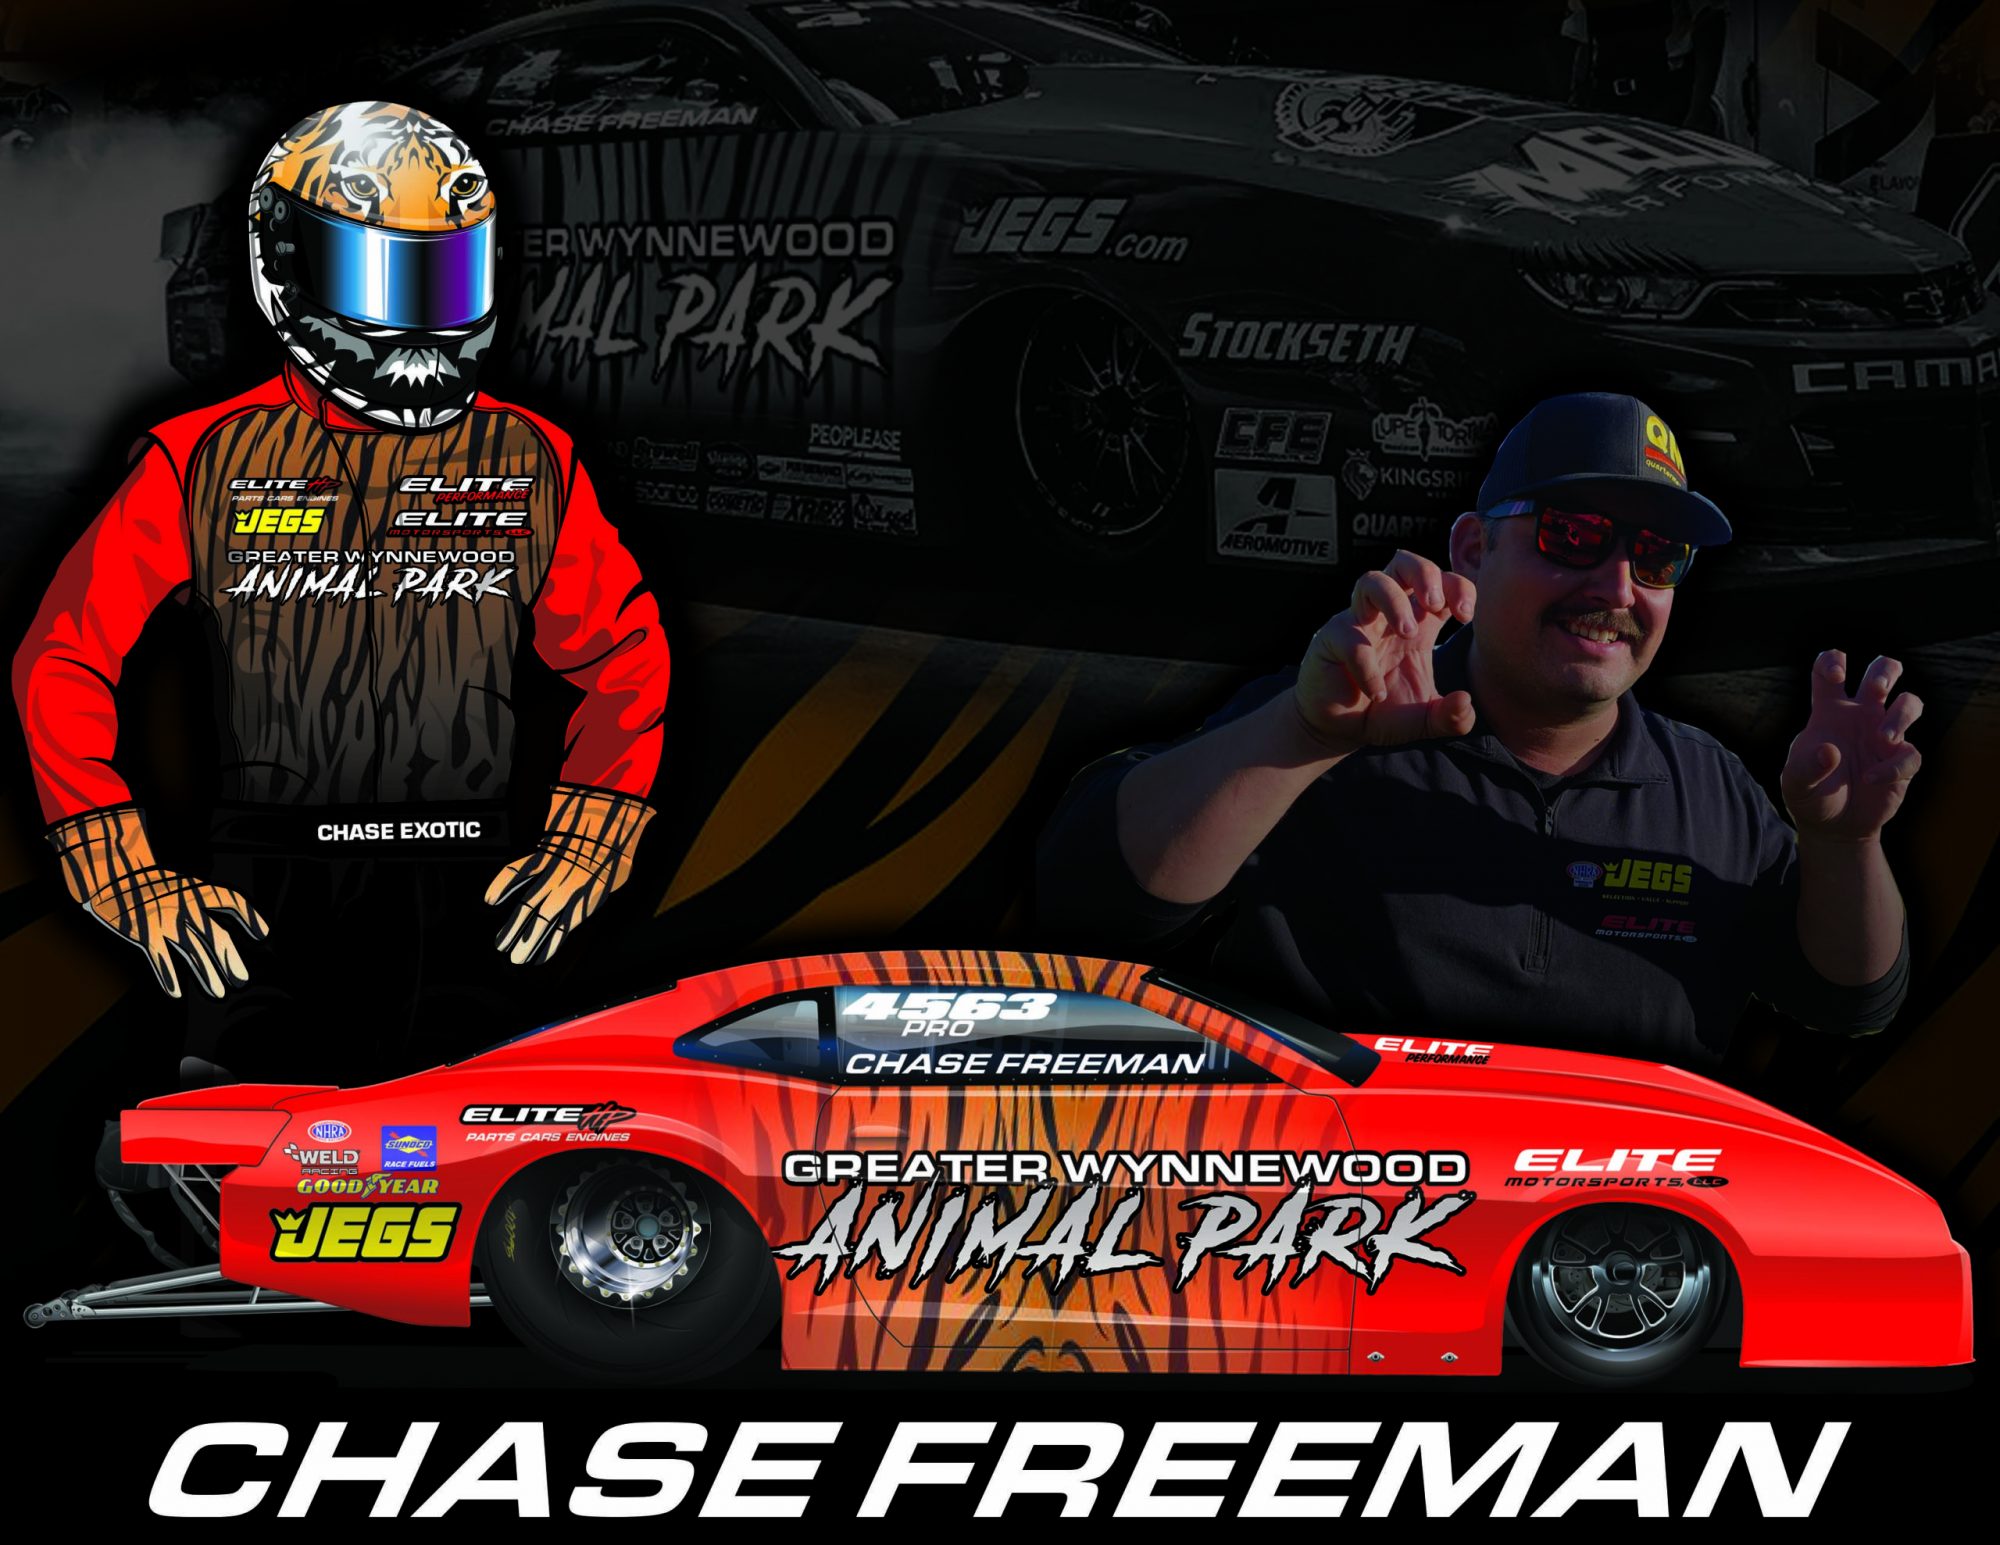 Elite Motorsports' Chase Freeman Set For Pro Stock Debut In Greater  Wynnewood Animal Park Camaro - Drag Illustrated | Drag Racing News,  Opinion, Interviews, Photos, Videos and More